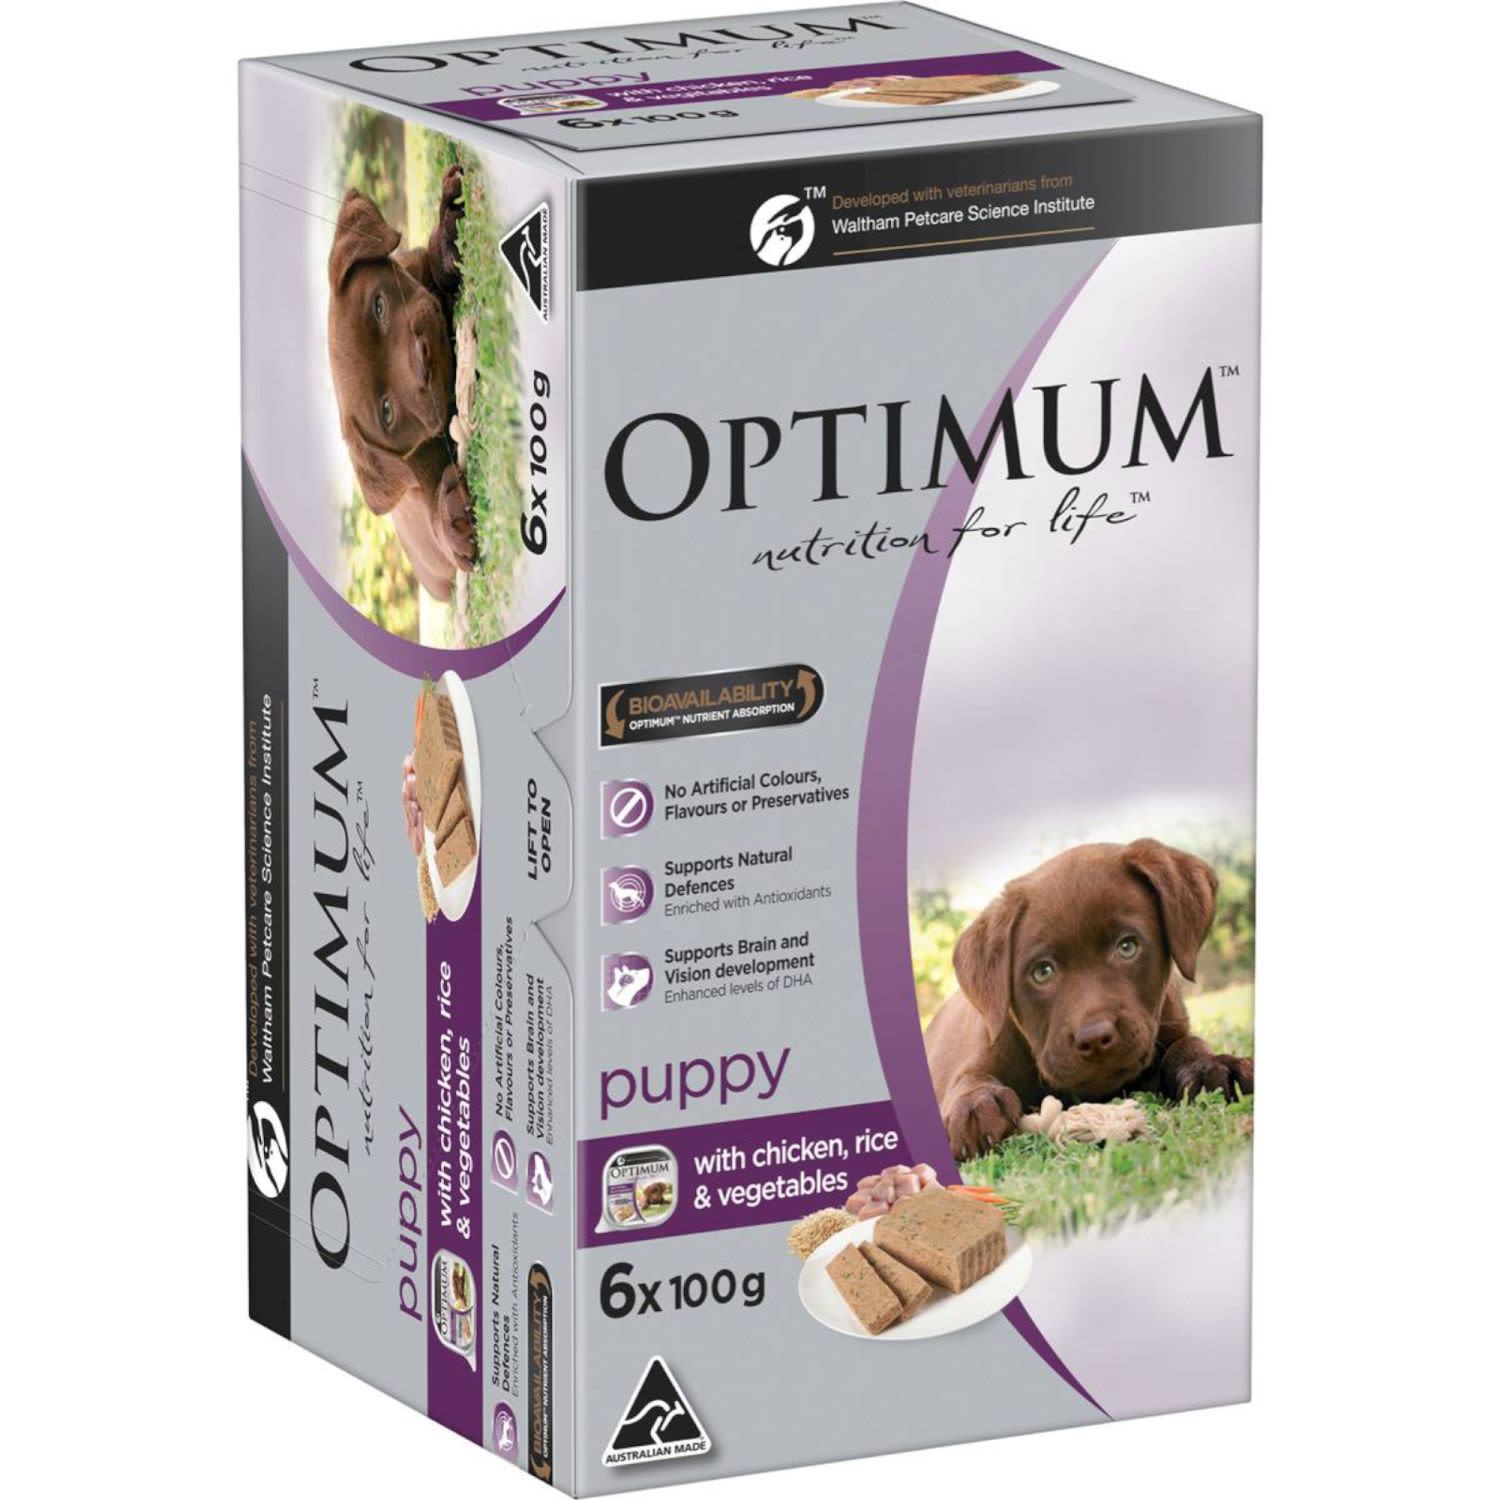 Optimum Puppy Wet Dog Food With Chicken, Rice & Vegetables Trays, 6 Each